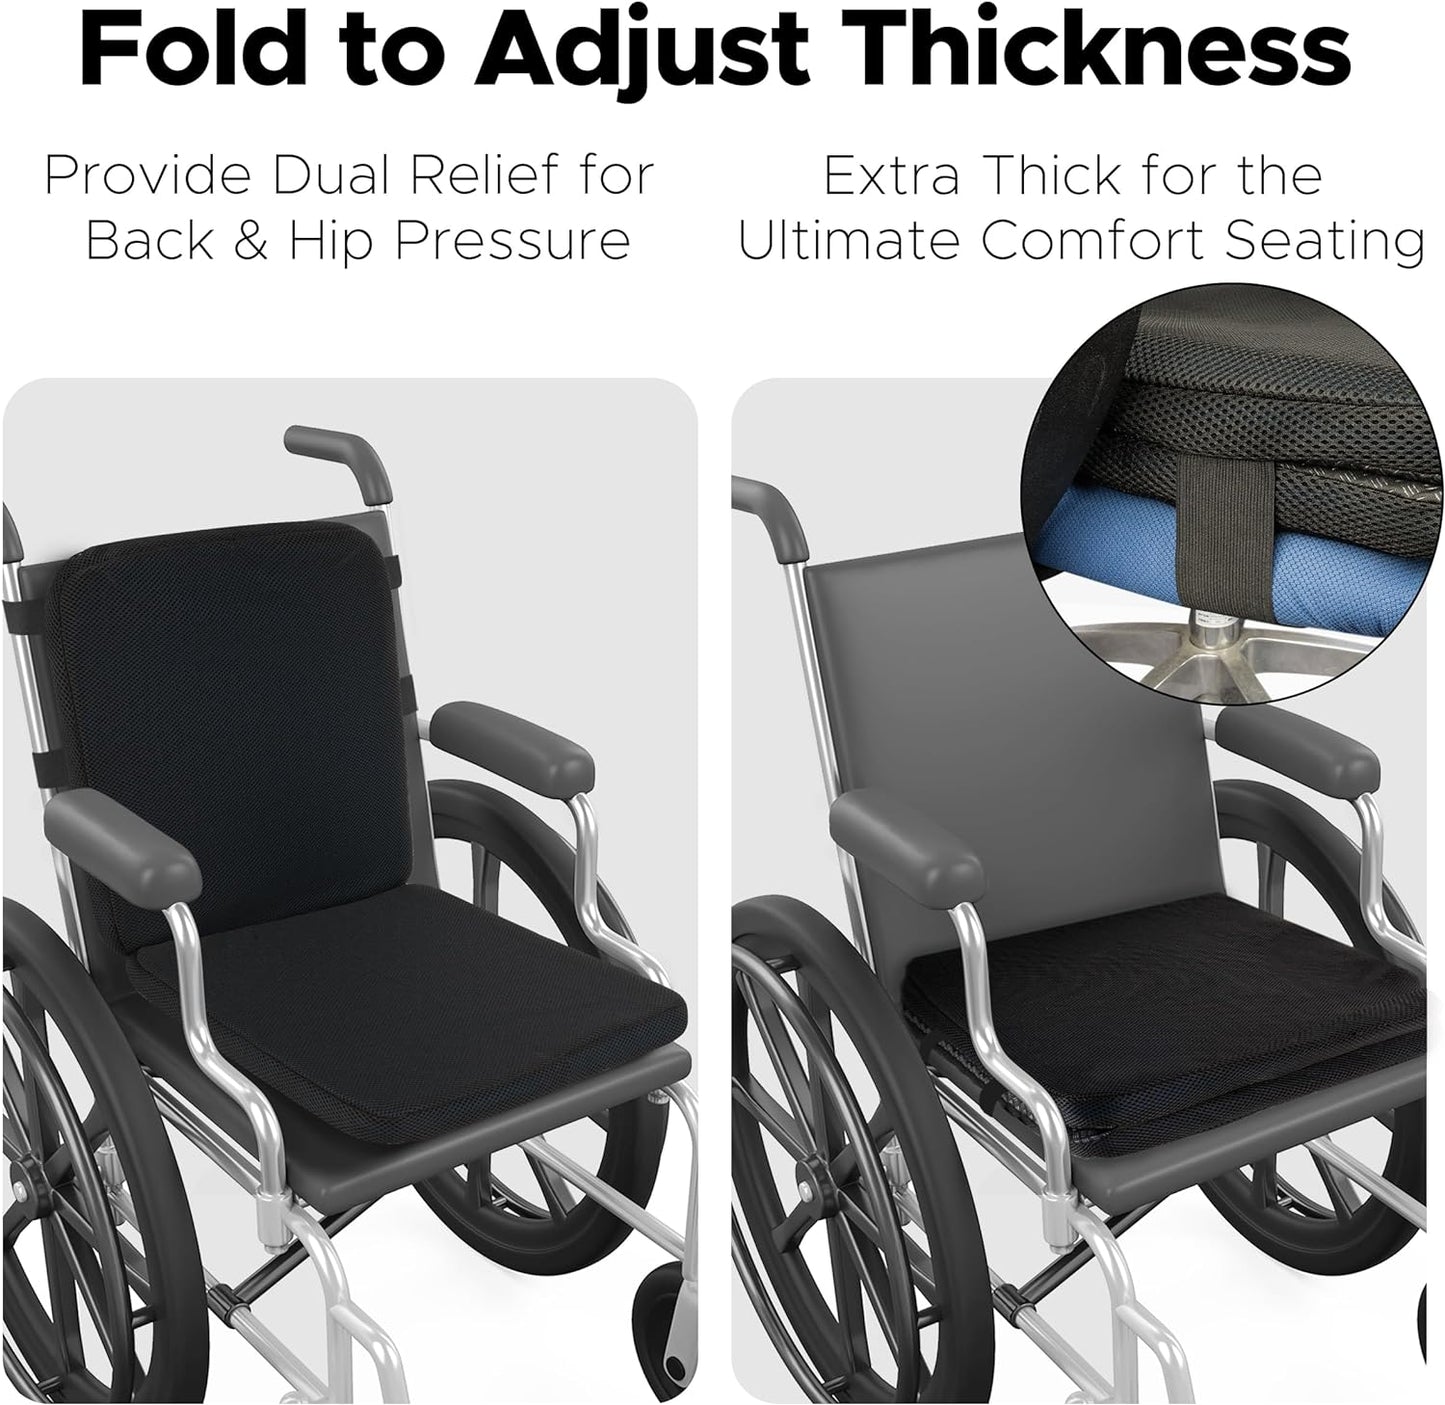 Sunlit Seat Jello, Gel Seat Cushion & Back Cushion for Long Sitting with Non-slip Cover, Gel Cushions for Wheelchair Office Chair Car Seat, Reduce Tailbone Pressure Orthopedic Sciatica Hip Pain Relief